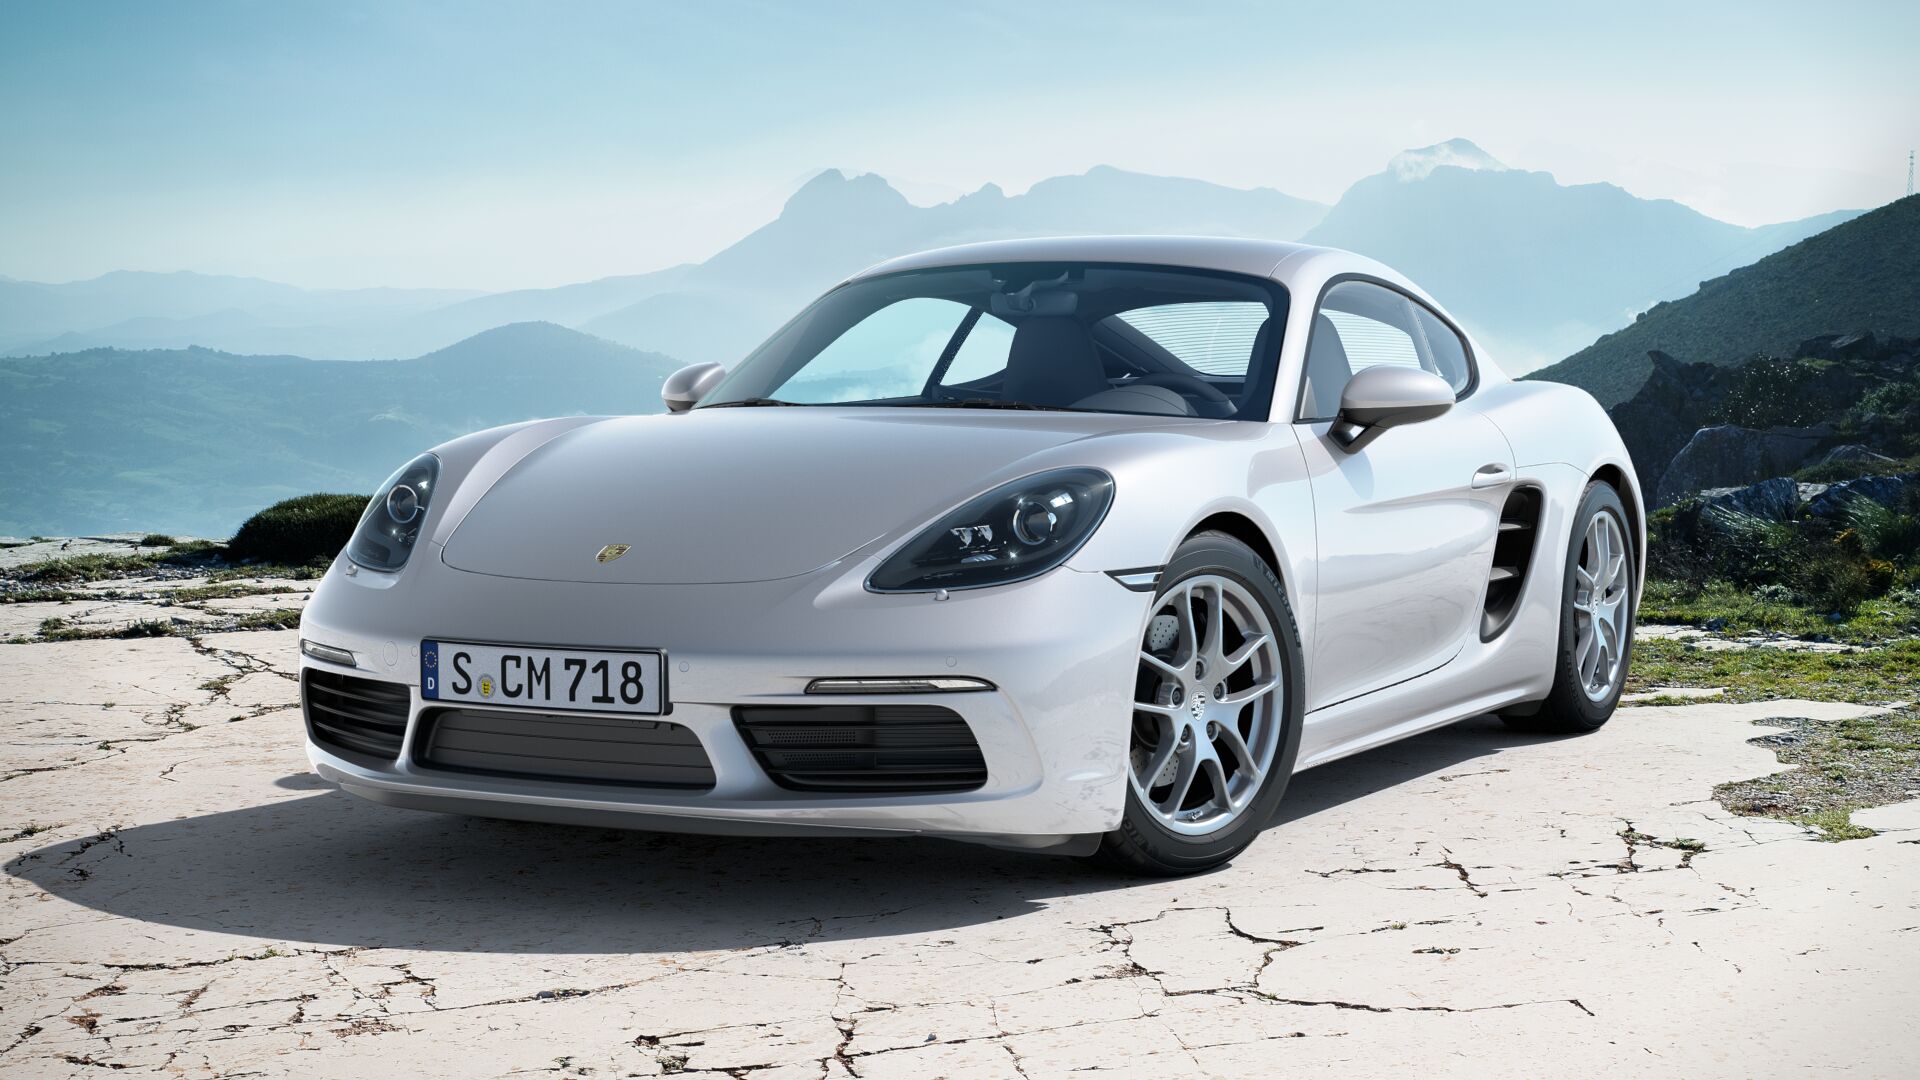 Porsche Taycan electric cars are the latest addition to Porsche's lineup - head over and find out more at your local Porsche Center, Porsche South Orlando, near Lake Mary, Florida.